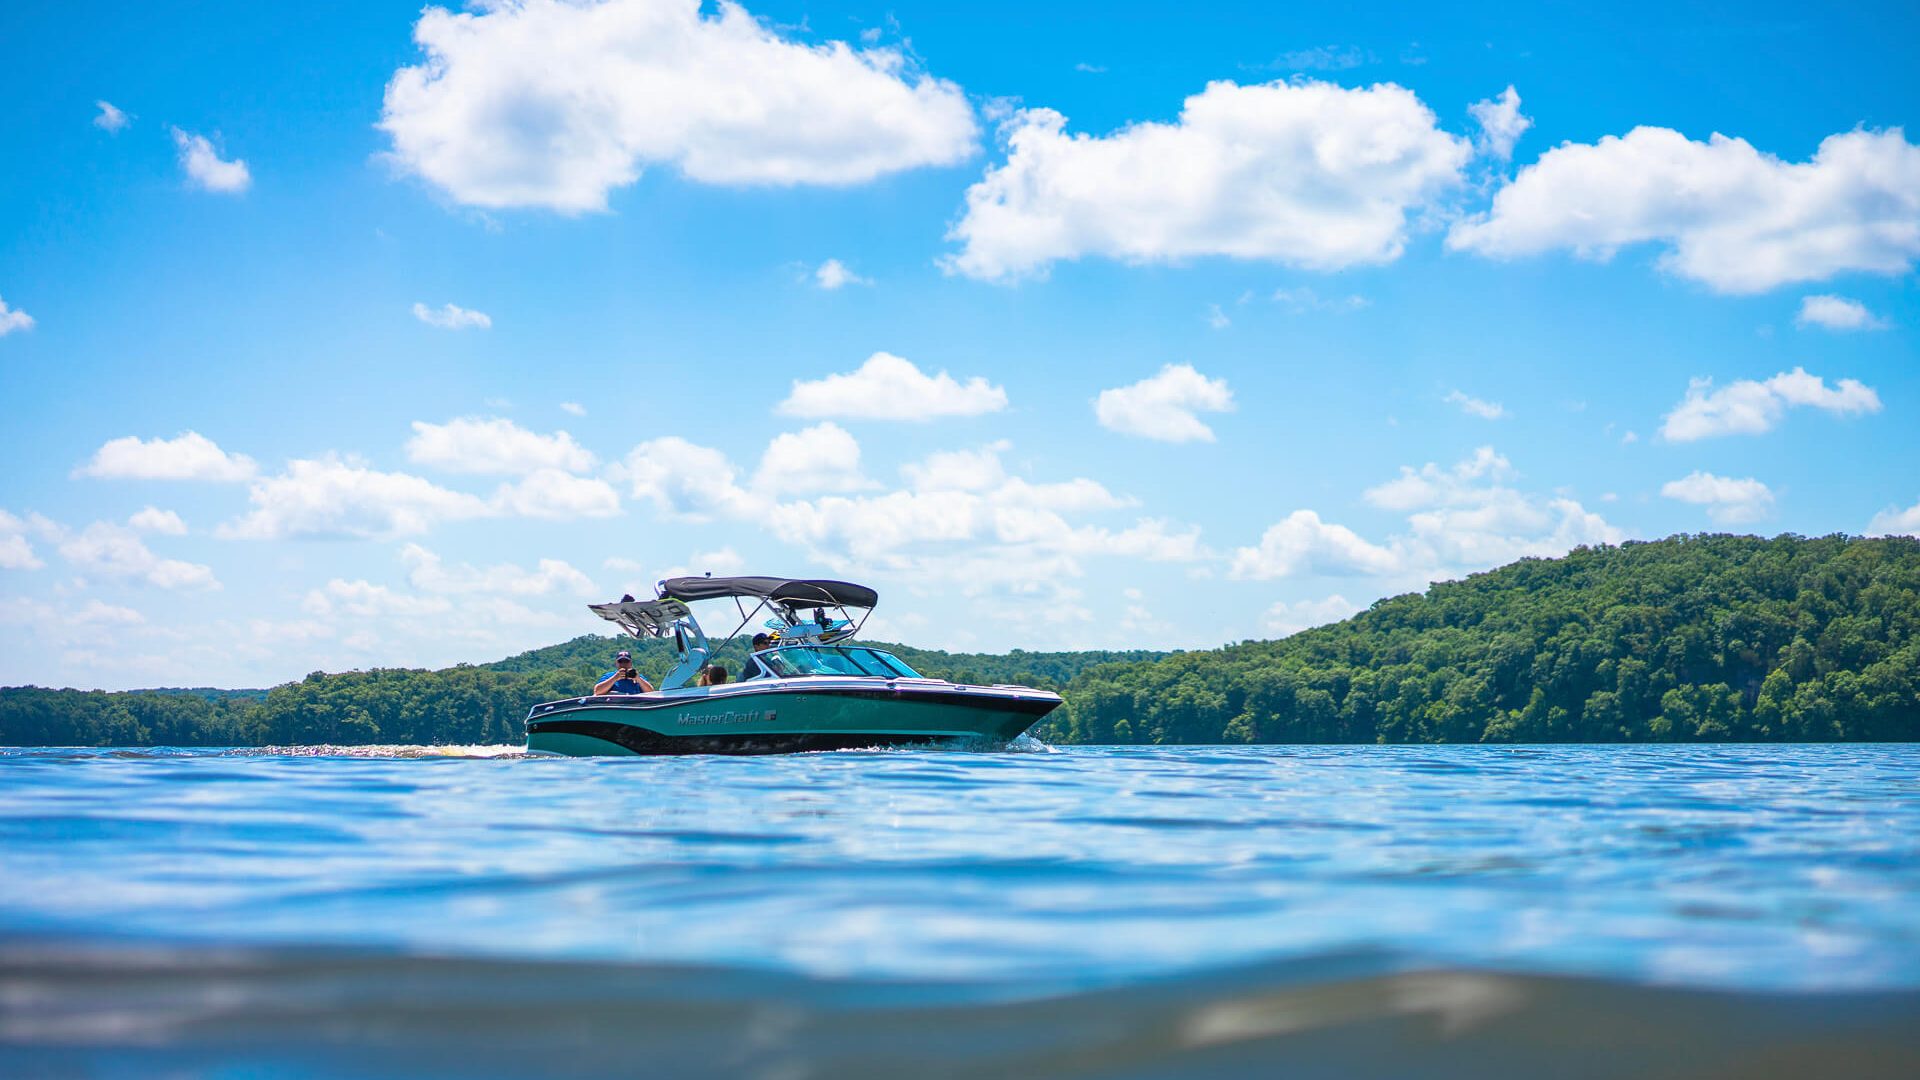 Lake of the Ozarks is a fishing destination